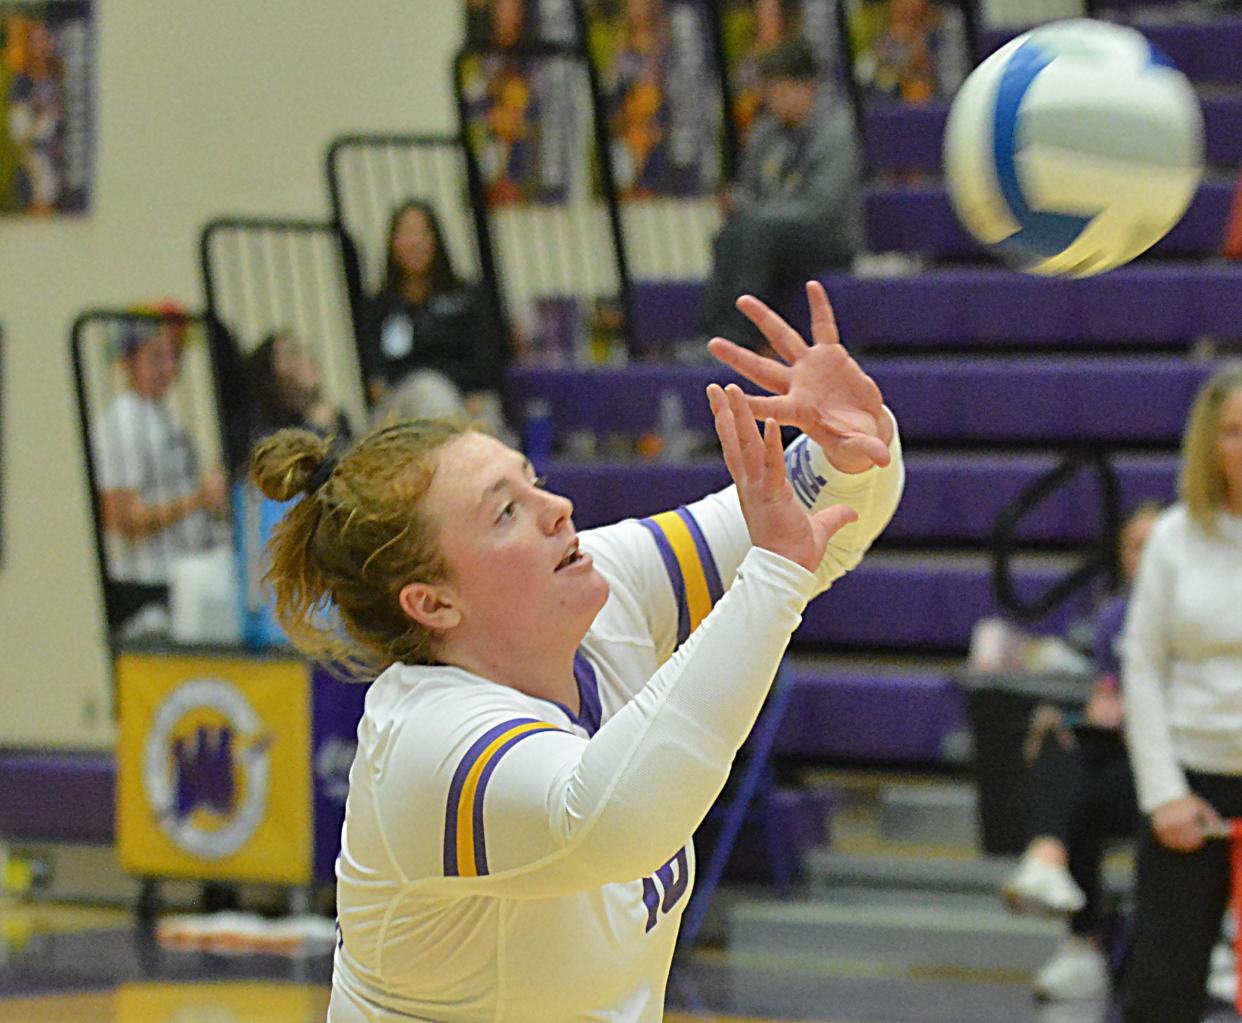 Watertown's Paige McAreavey lift her hands to receive the ball during an Eastern South Dakota Conference volleyball match against Yankton on Thursday, Nov. 2, 2023 in the Watertown Civic Arena.